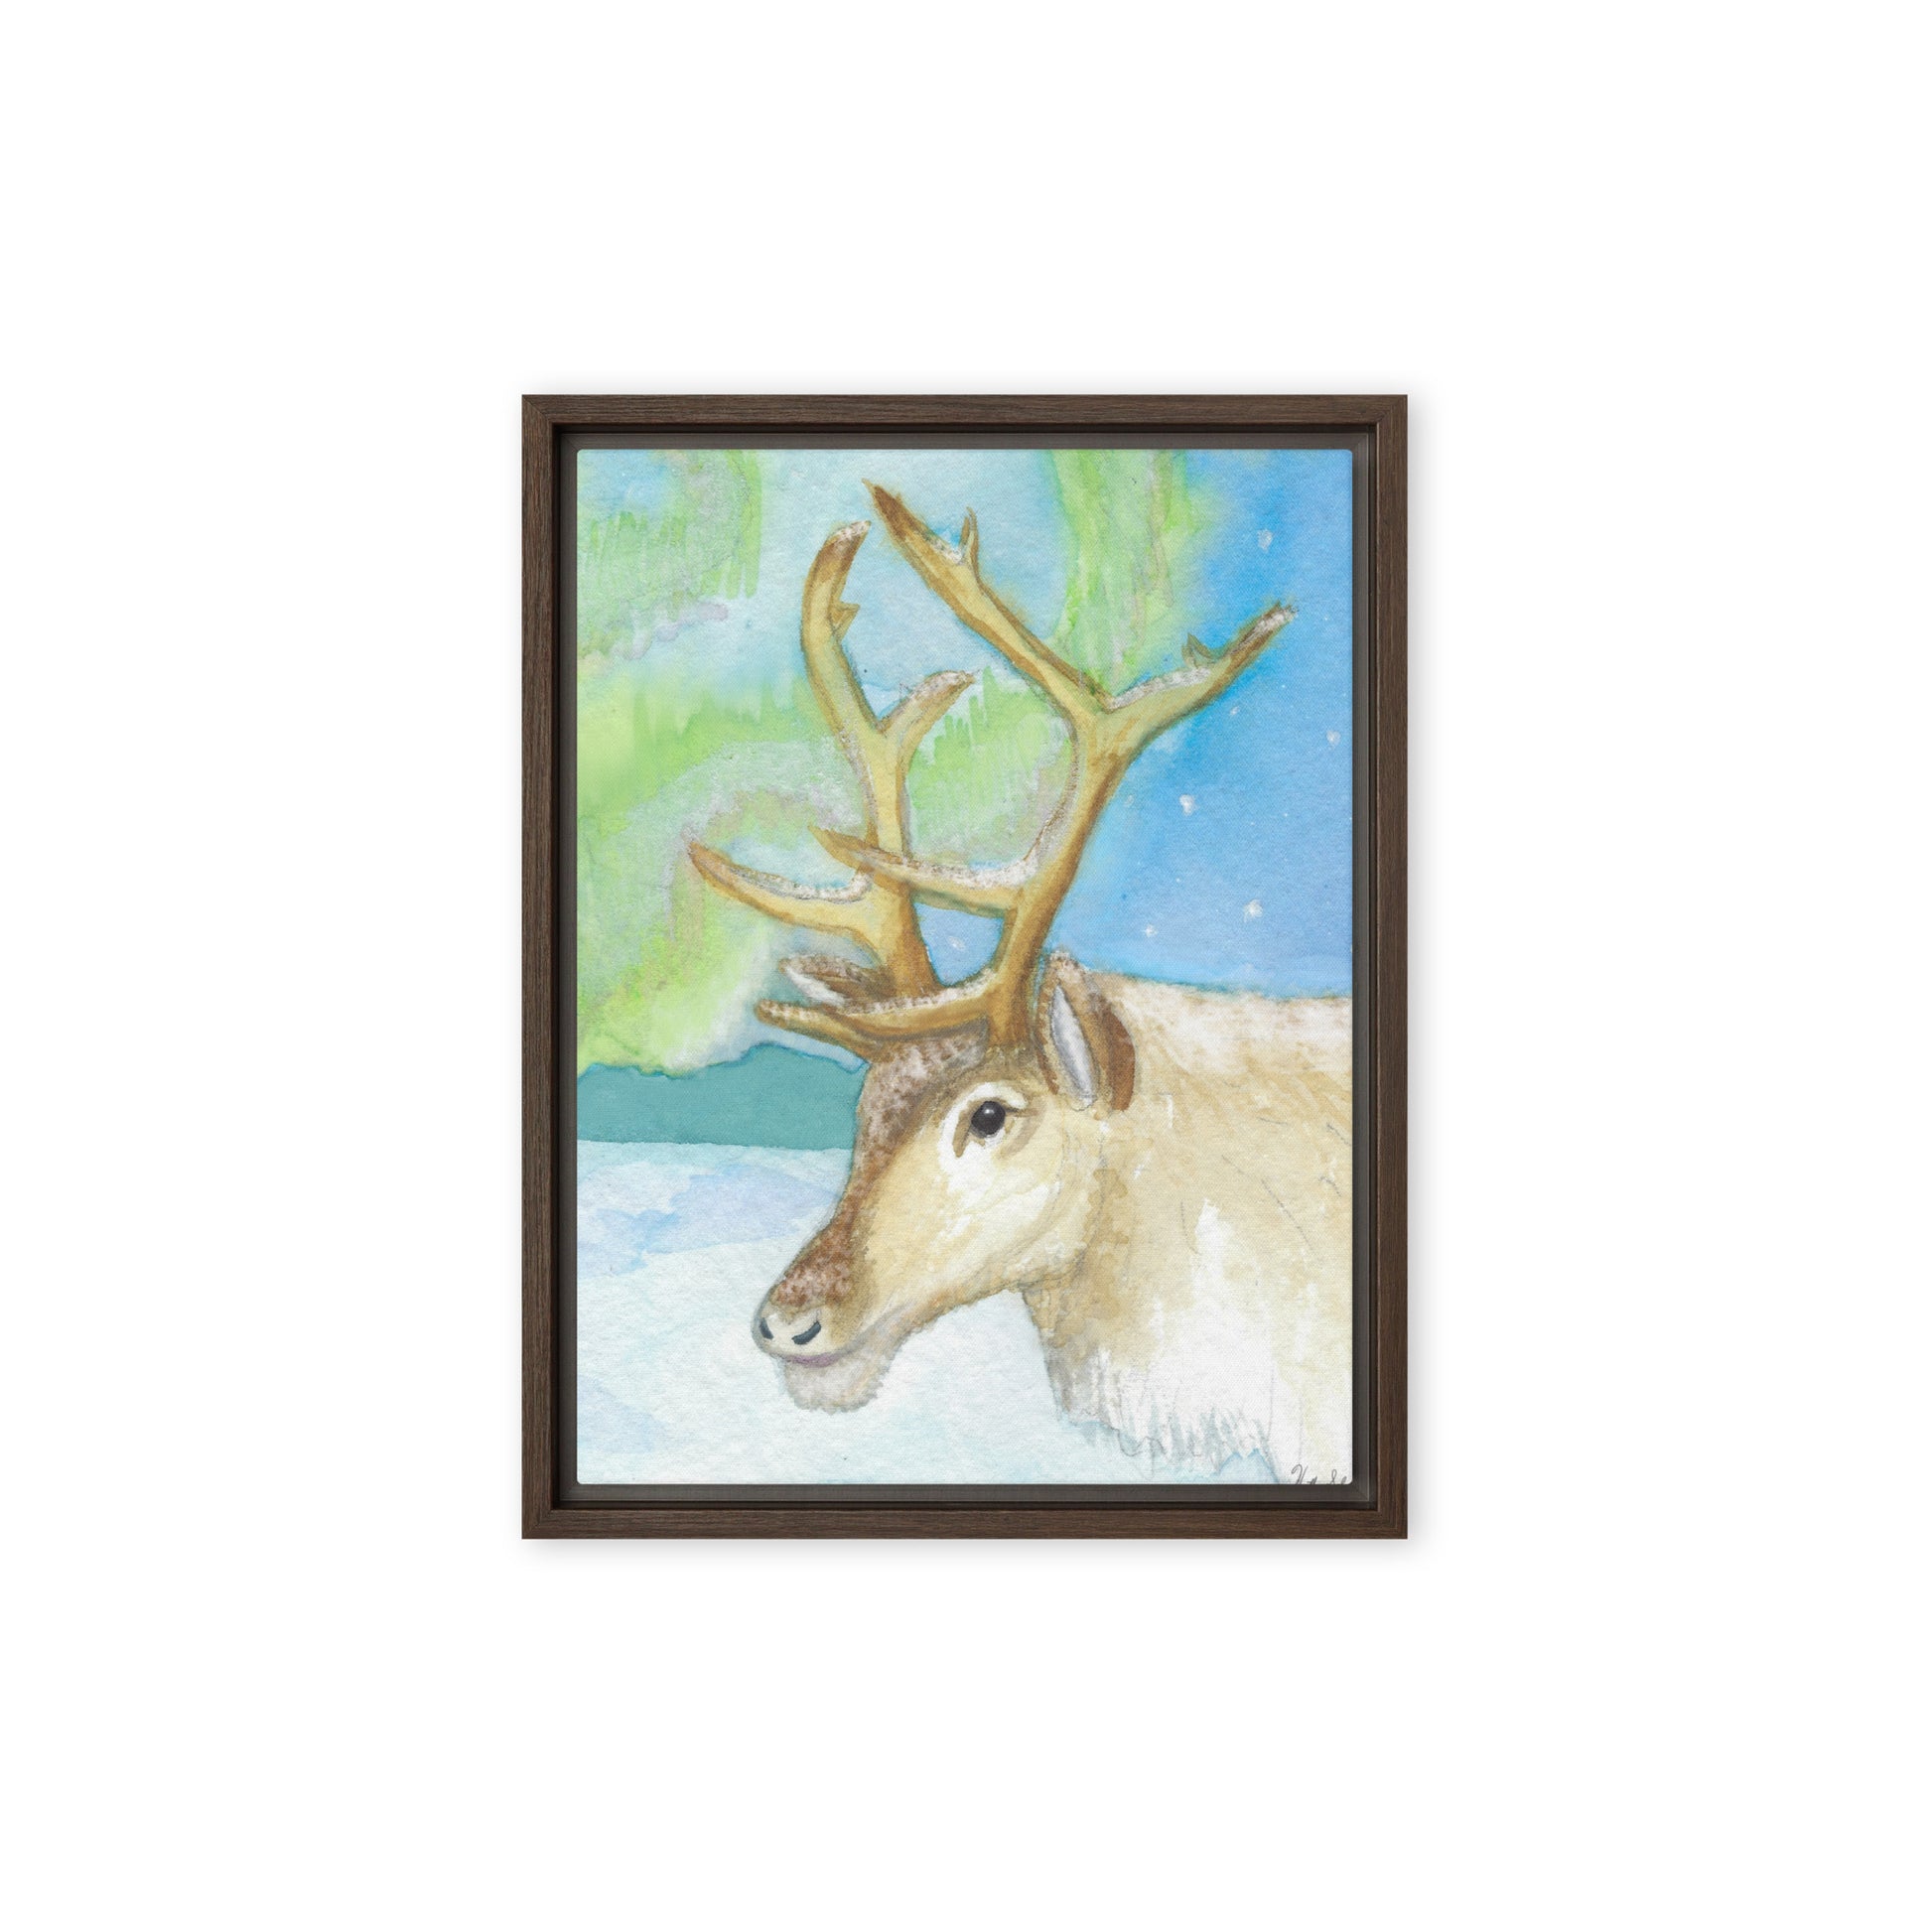 9 by 12 inch framed canvas art print of Heather Silver's Northern Lights Reindeer.  Canvas print mounted in a dark brown pine frame. Hanging hardware included.